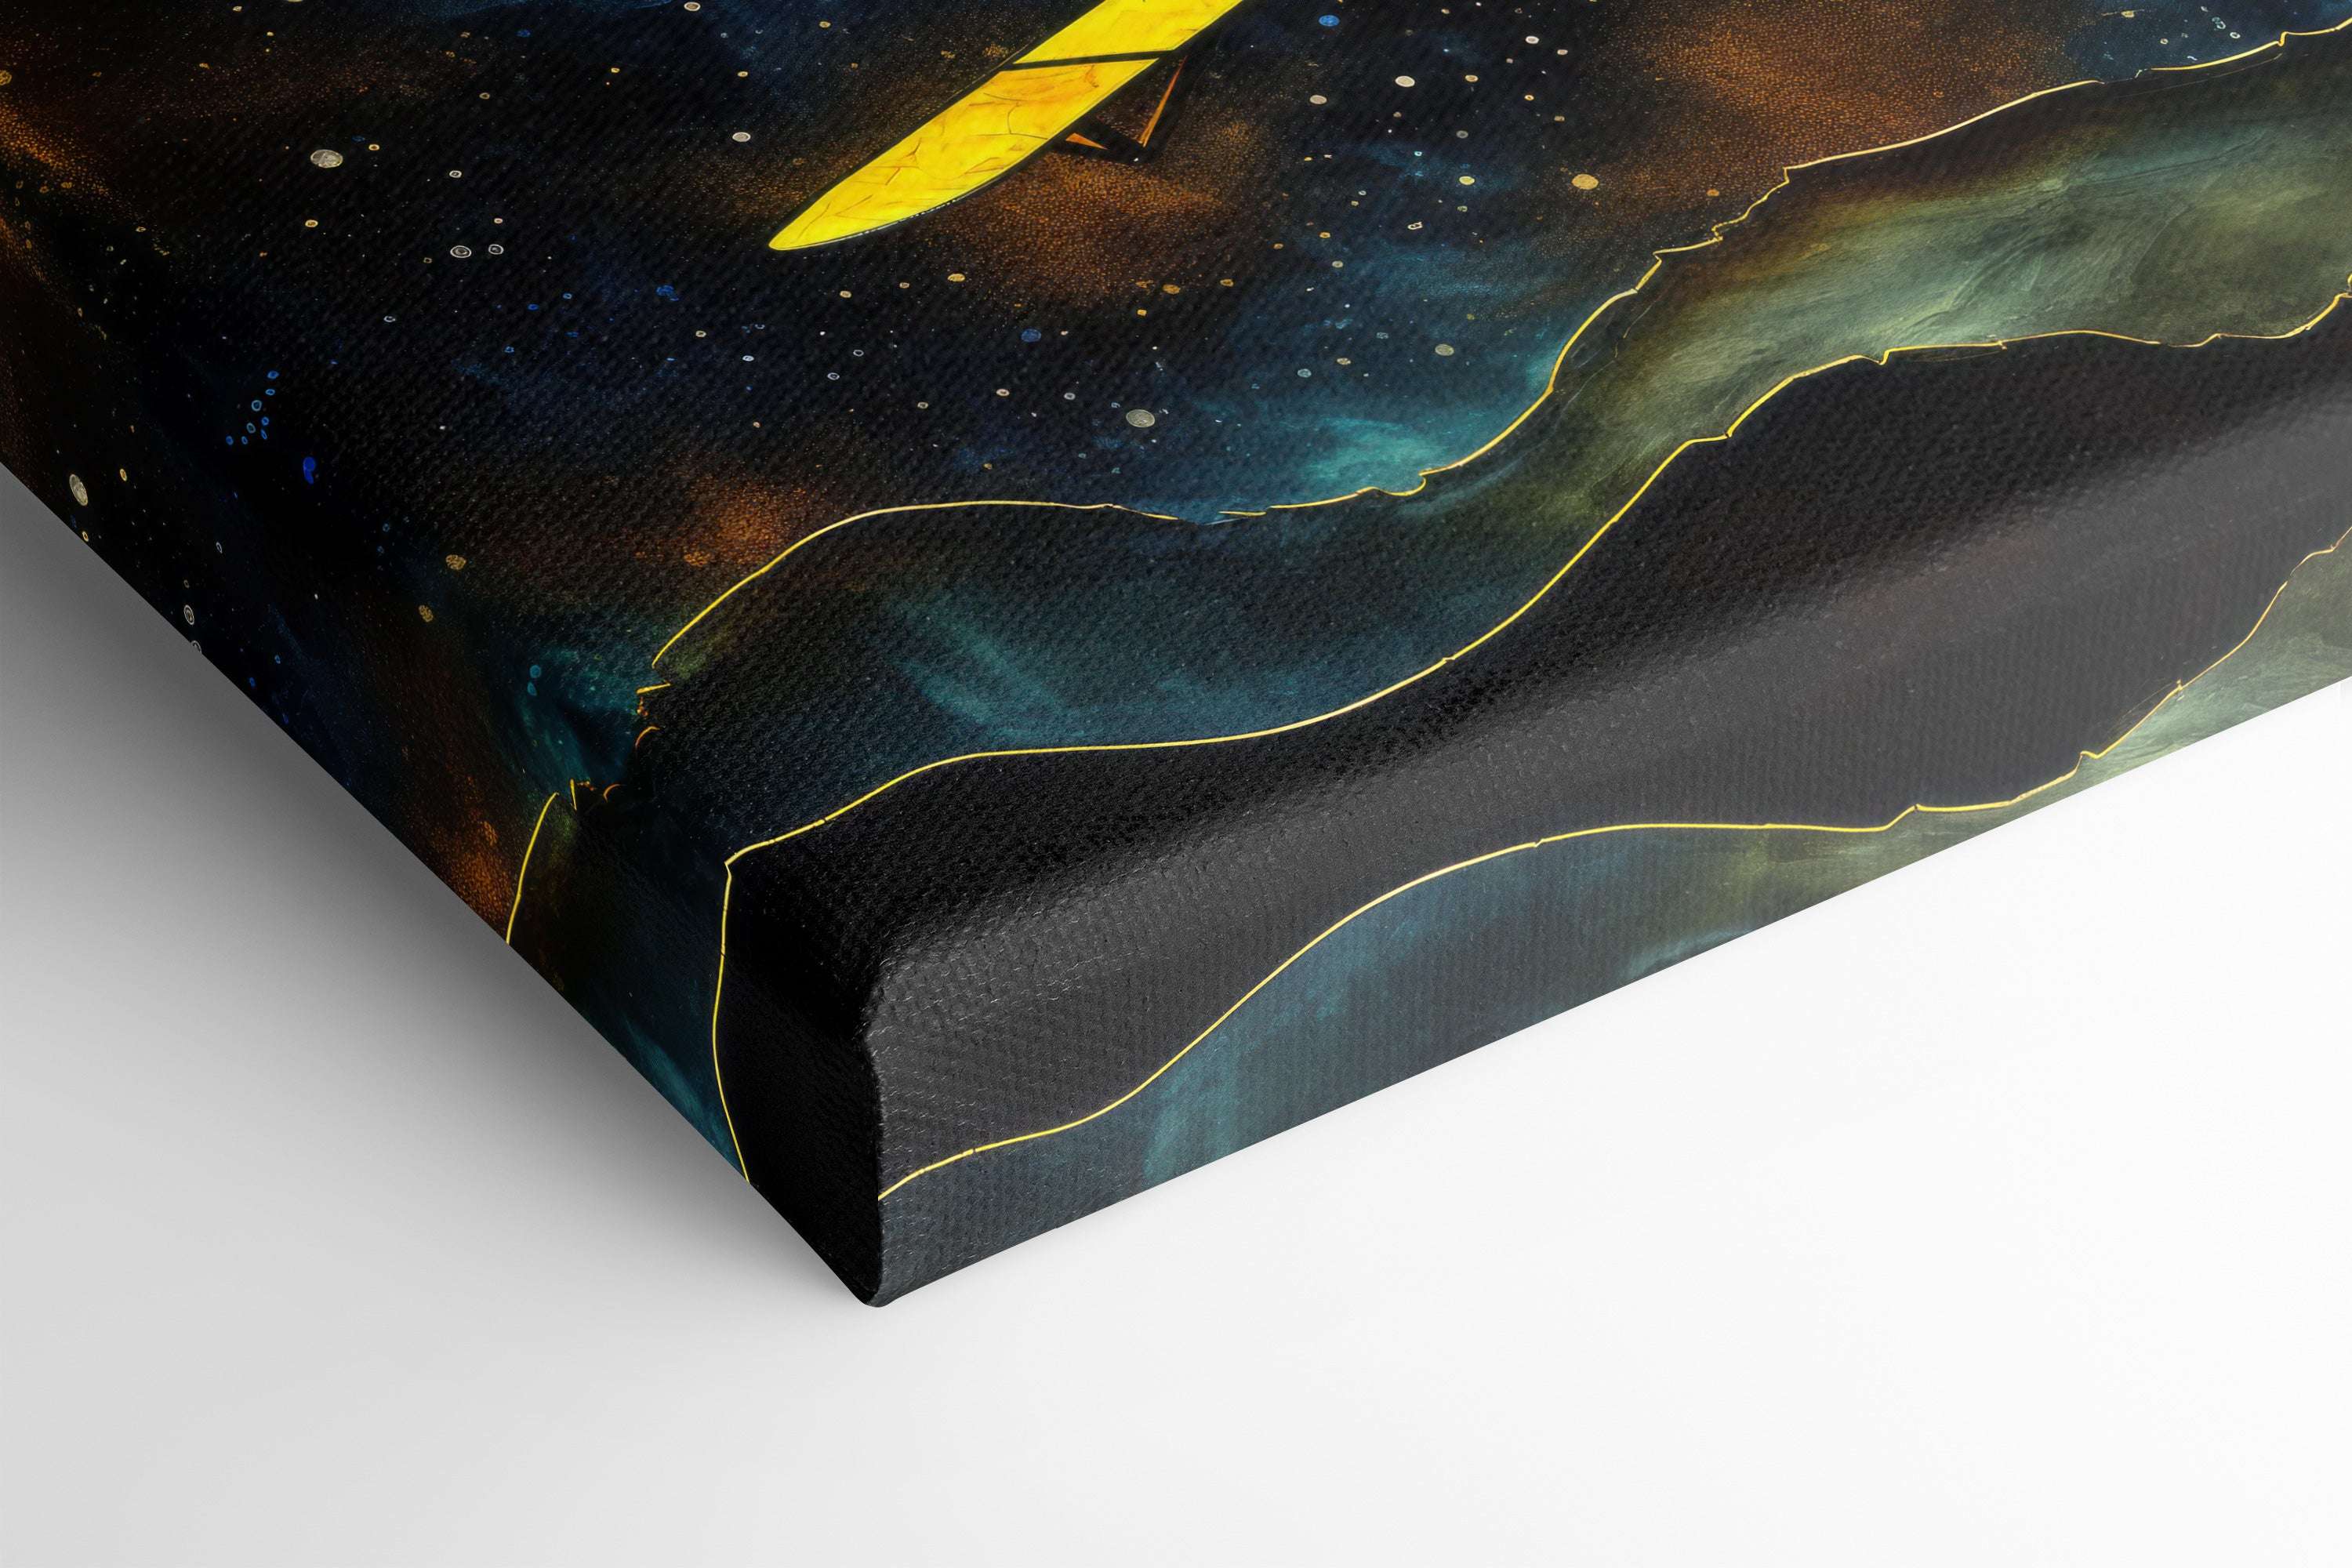 Yellow Airplane's Journey Over a Hill and Stars - Canvas Print - Artoholica Ready to Hang Canvas Print